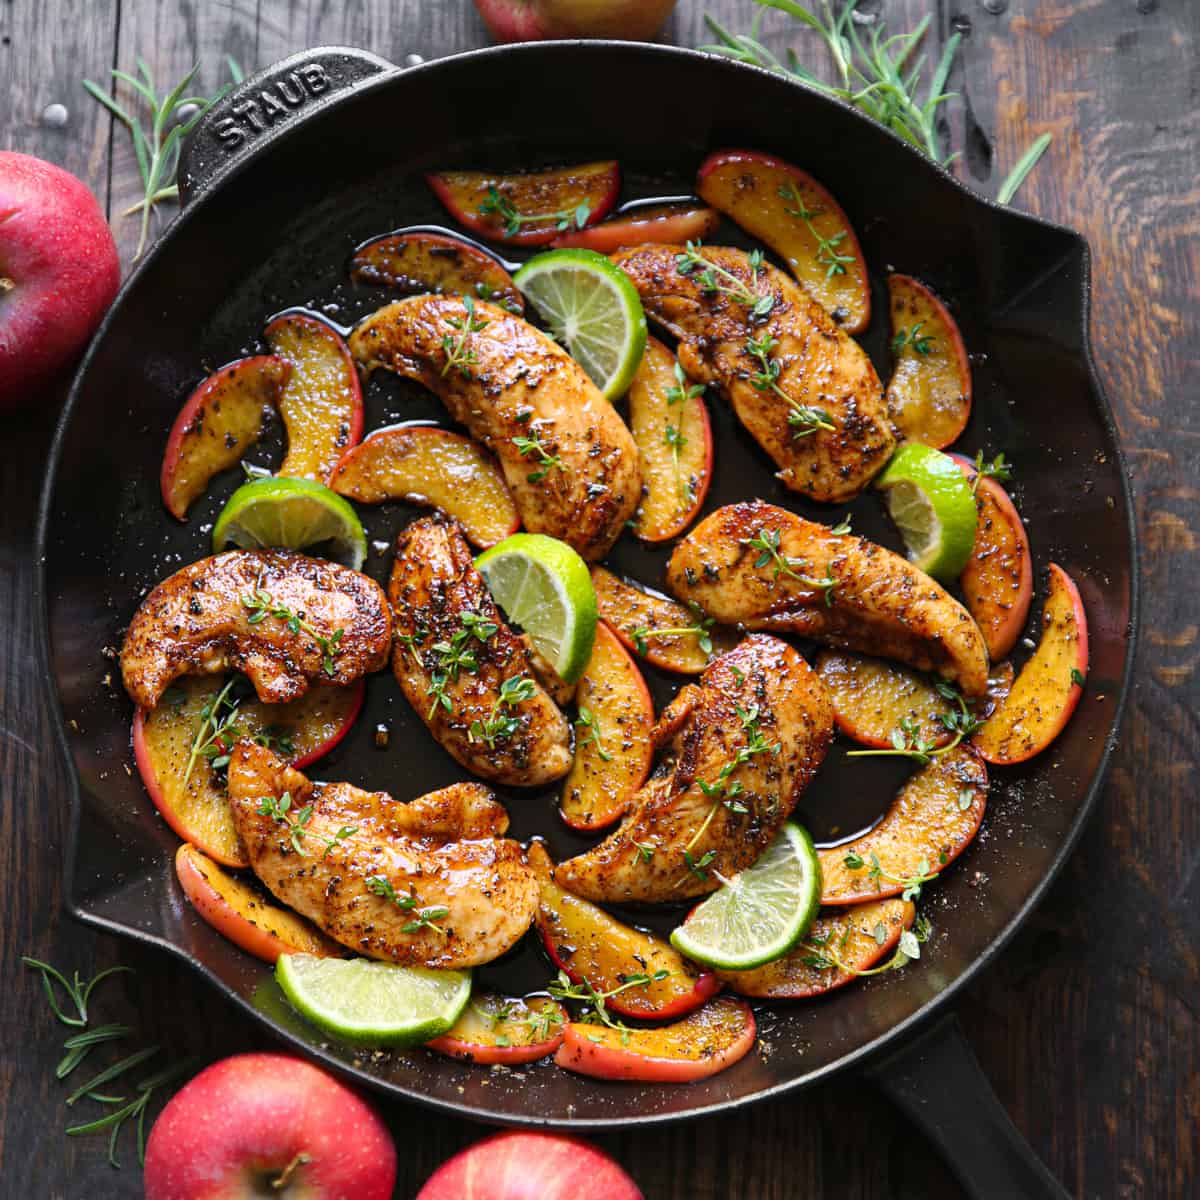 Chicken with Apples, Maple-Lime Sauce, and lime slices - in a cast iron skillet.